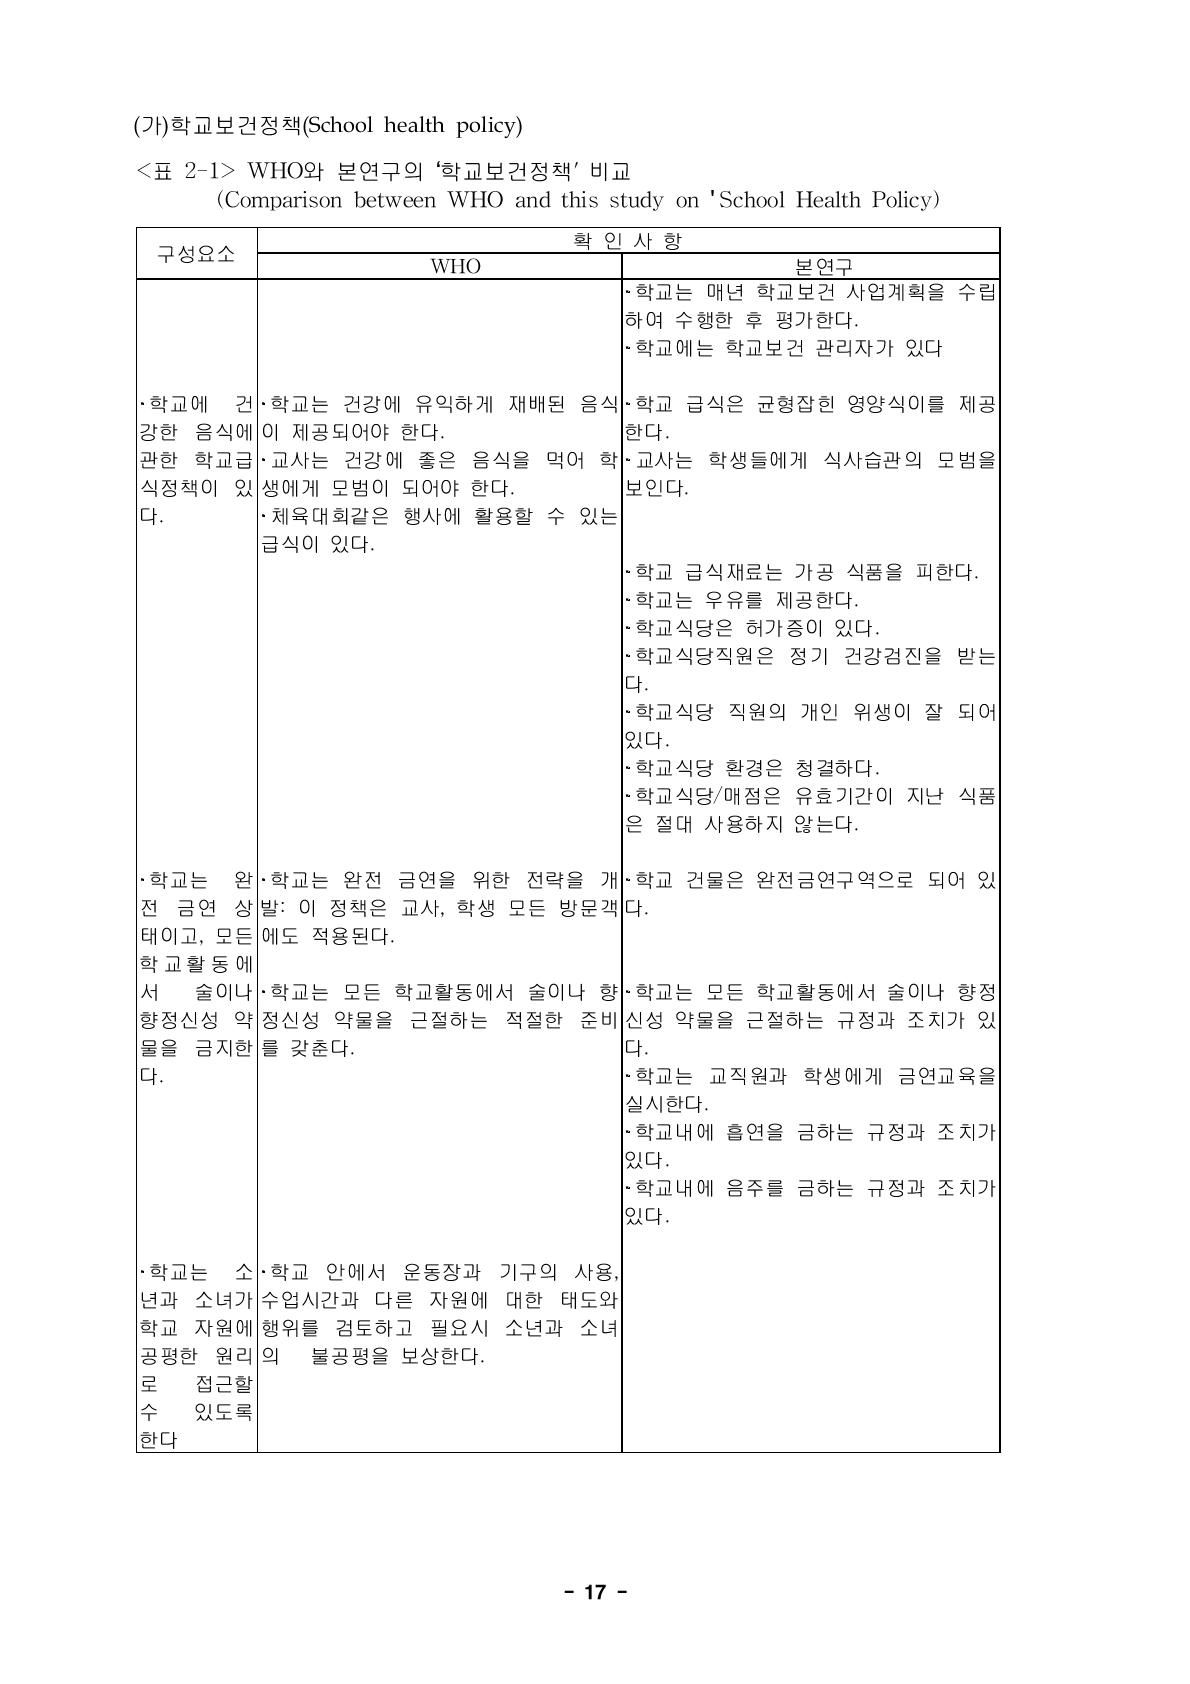 WHO와 본연구의 ‘학교보건정책’ 비교 (Comparison between WHO and this study on 'School Health Policy)